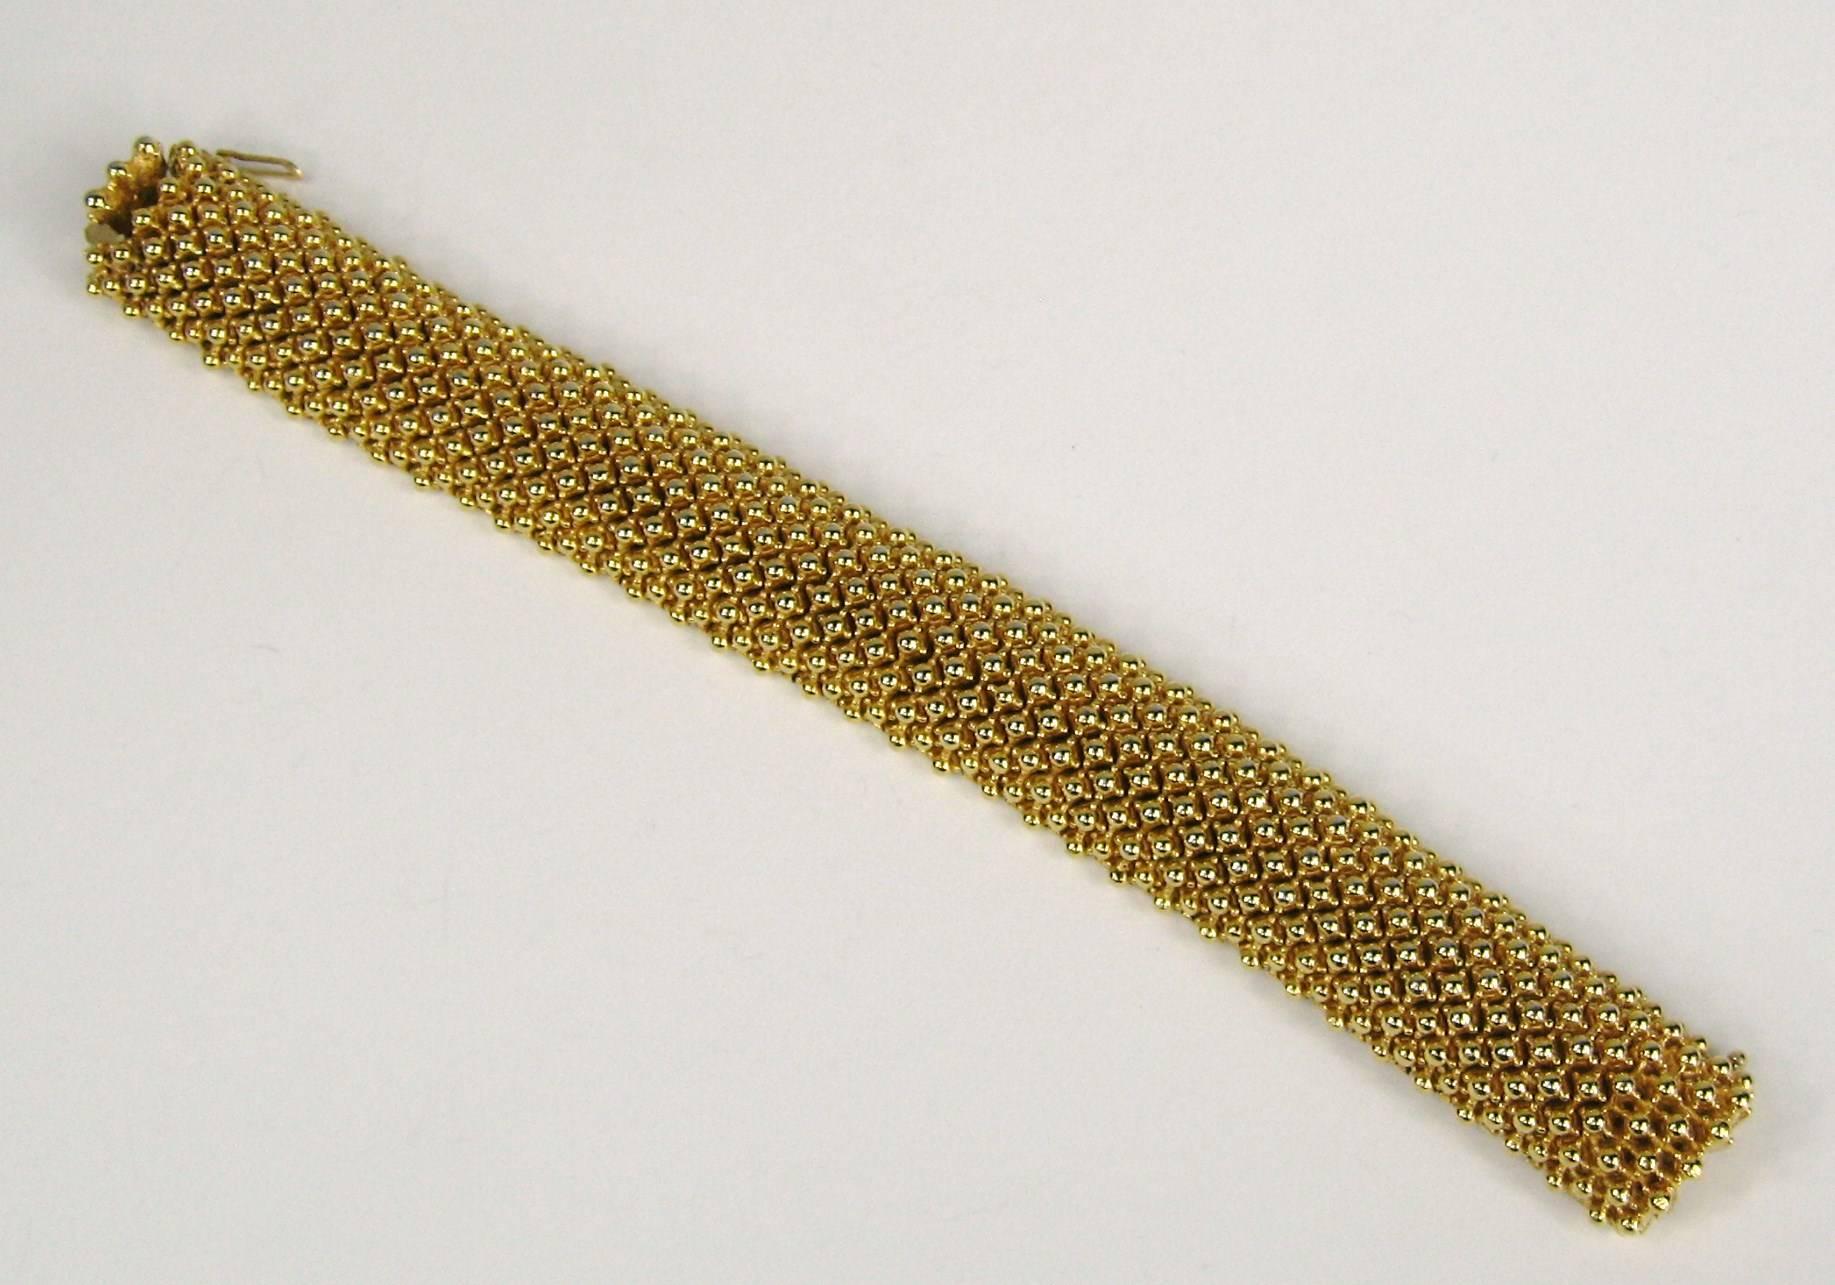 Large Gold Tone CINER Bracelet
Another fabulous piece of Ciner Jewelry which has never been worn 
Matching Necklace available as well. Please check our storefront 

Measuring .75